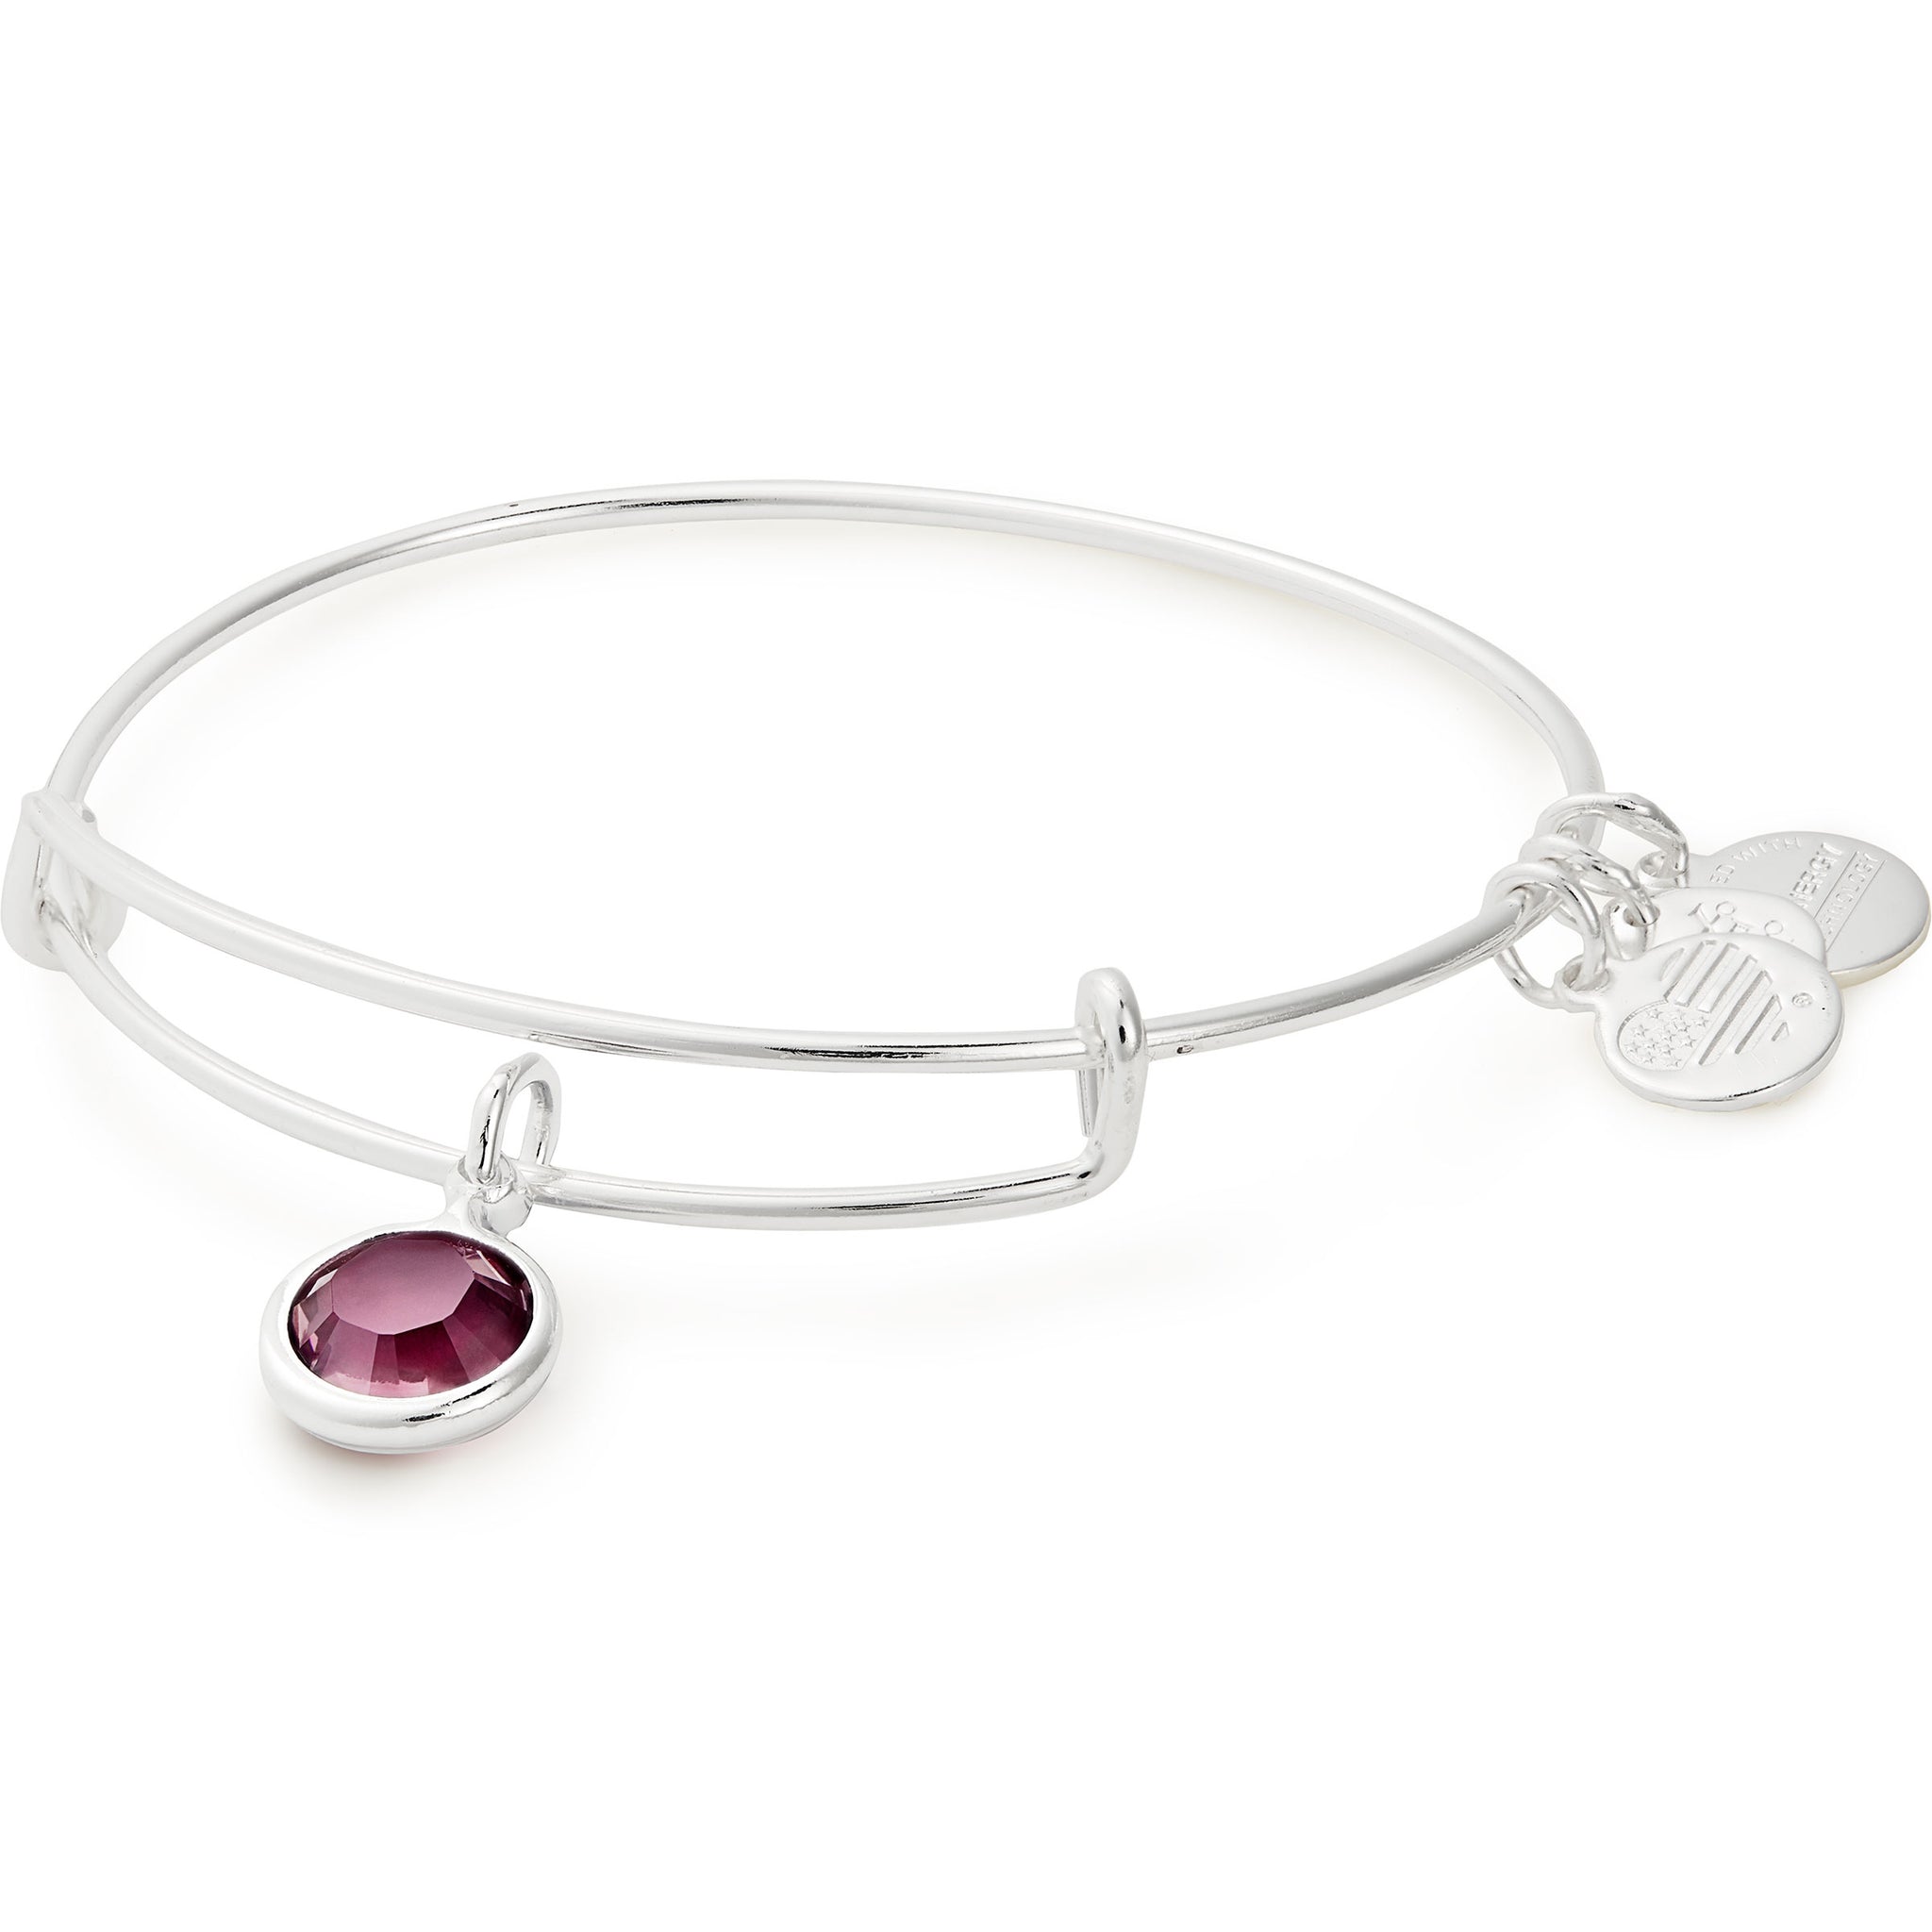 Birthstone Collection in Silver